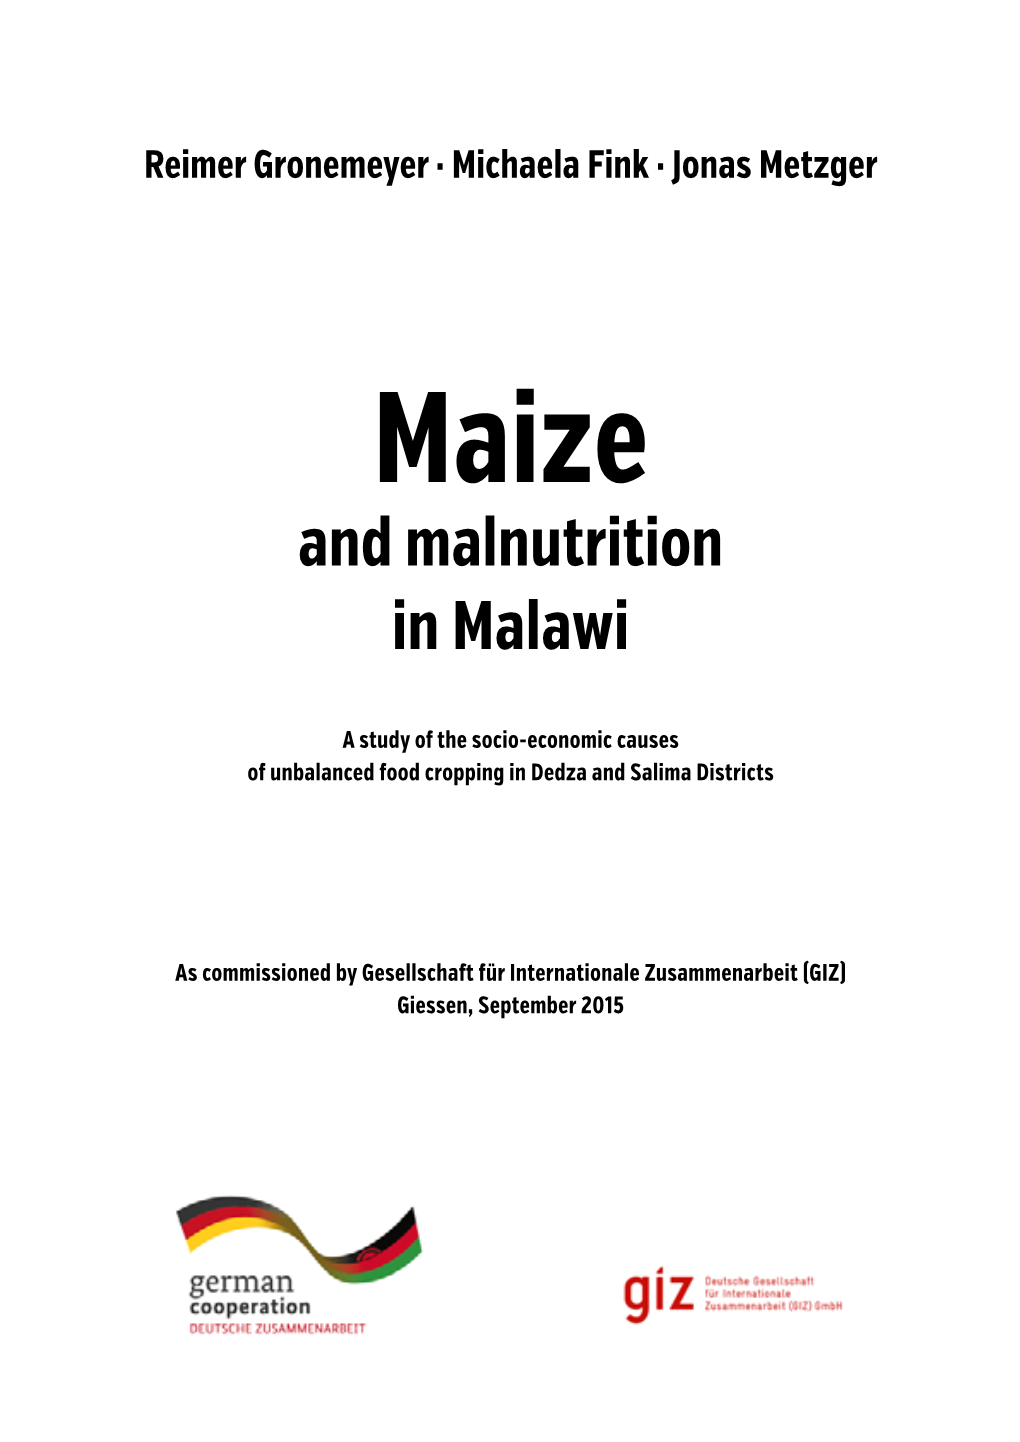 And Malnutrition in Malawi